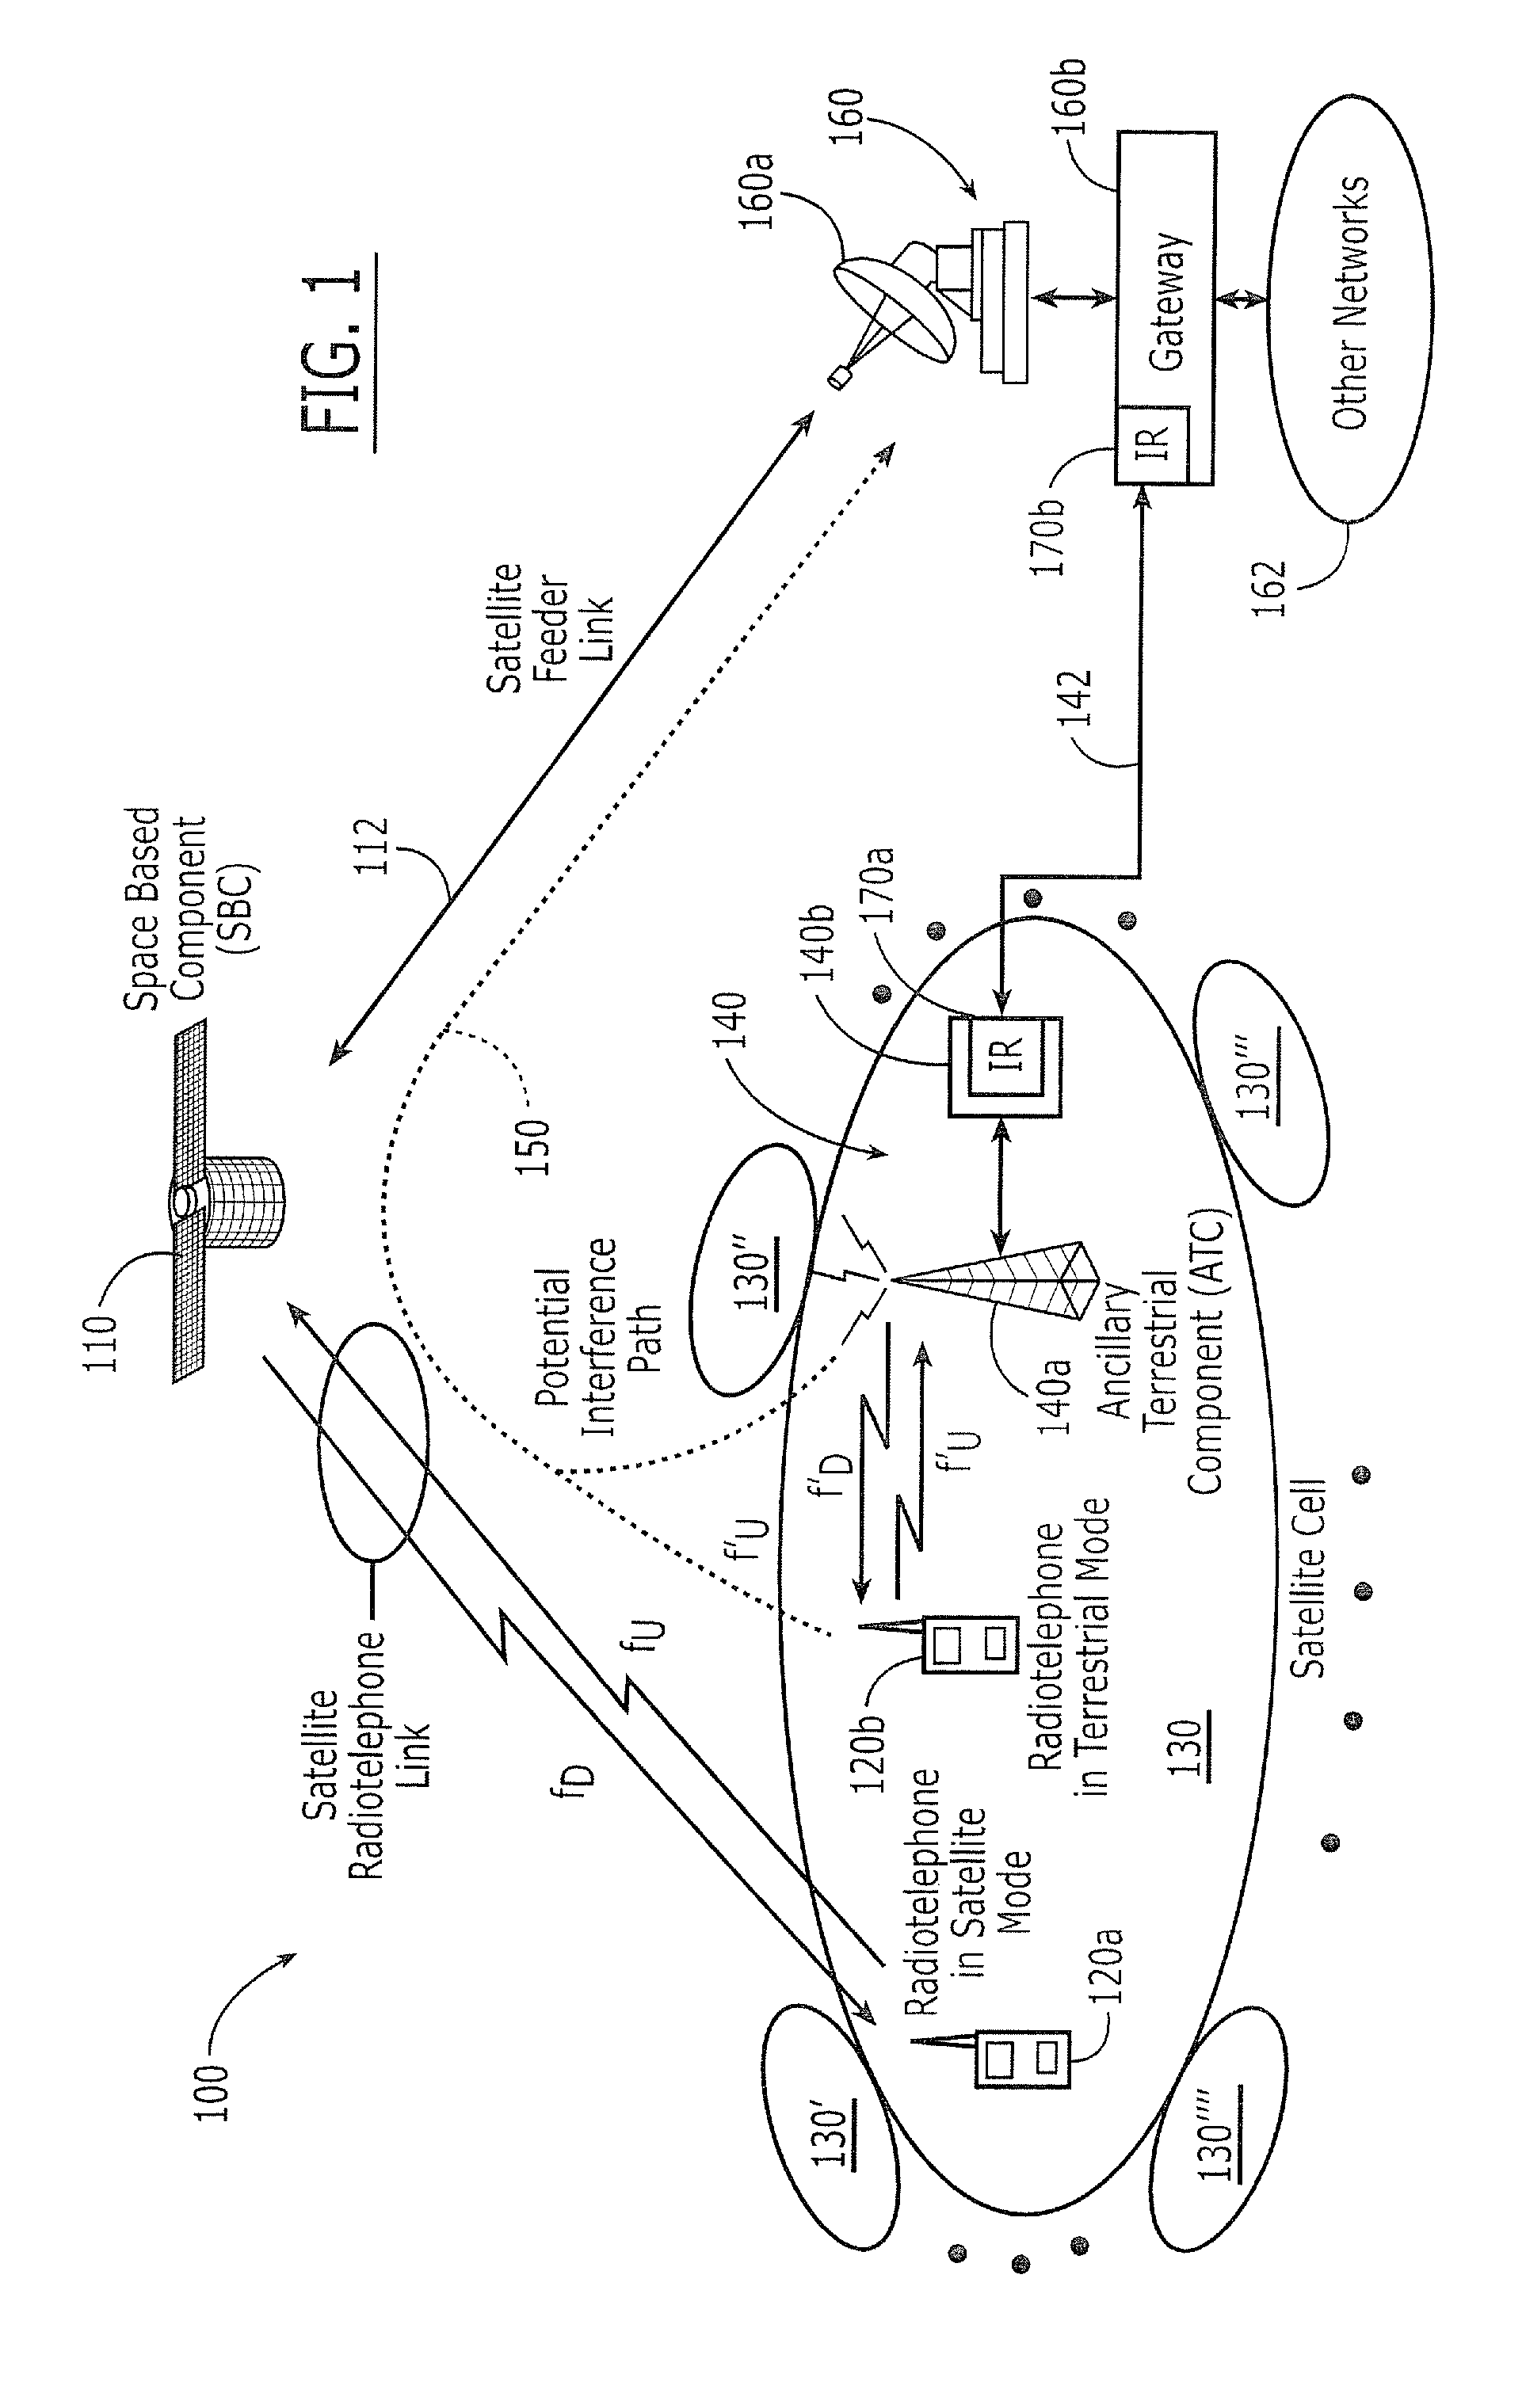 Systems and methods for monitoring selected terrestrially used satellite frequency signals to reduce potential interference